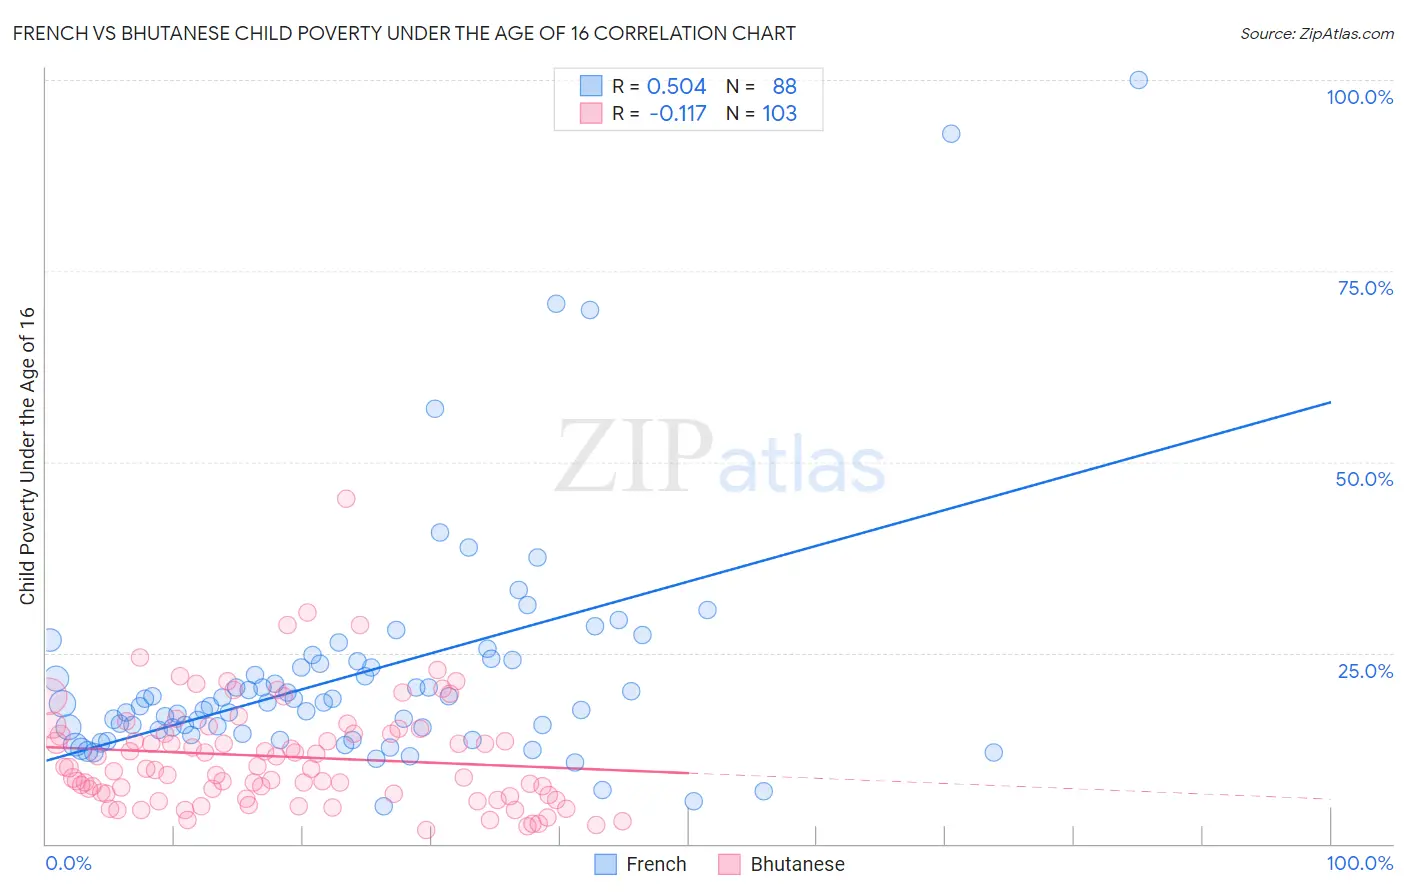 French vs Bhutanese Child Poverty Under the Age of 16